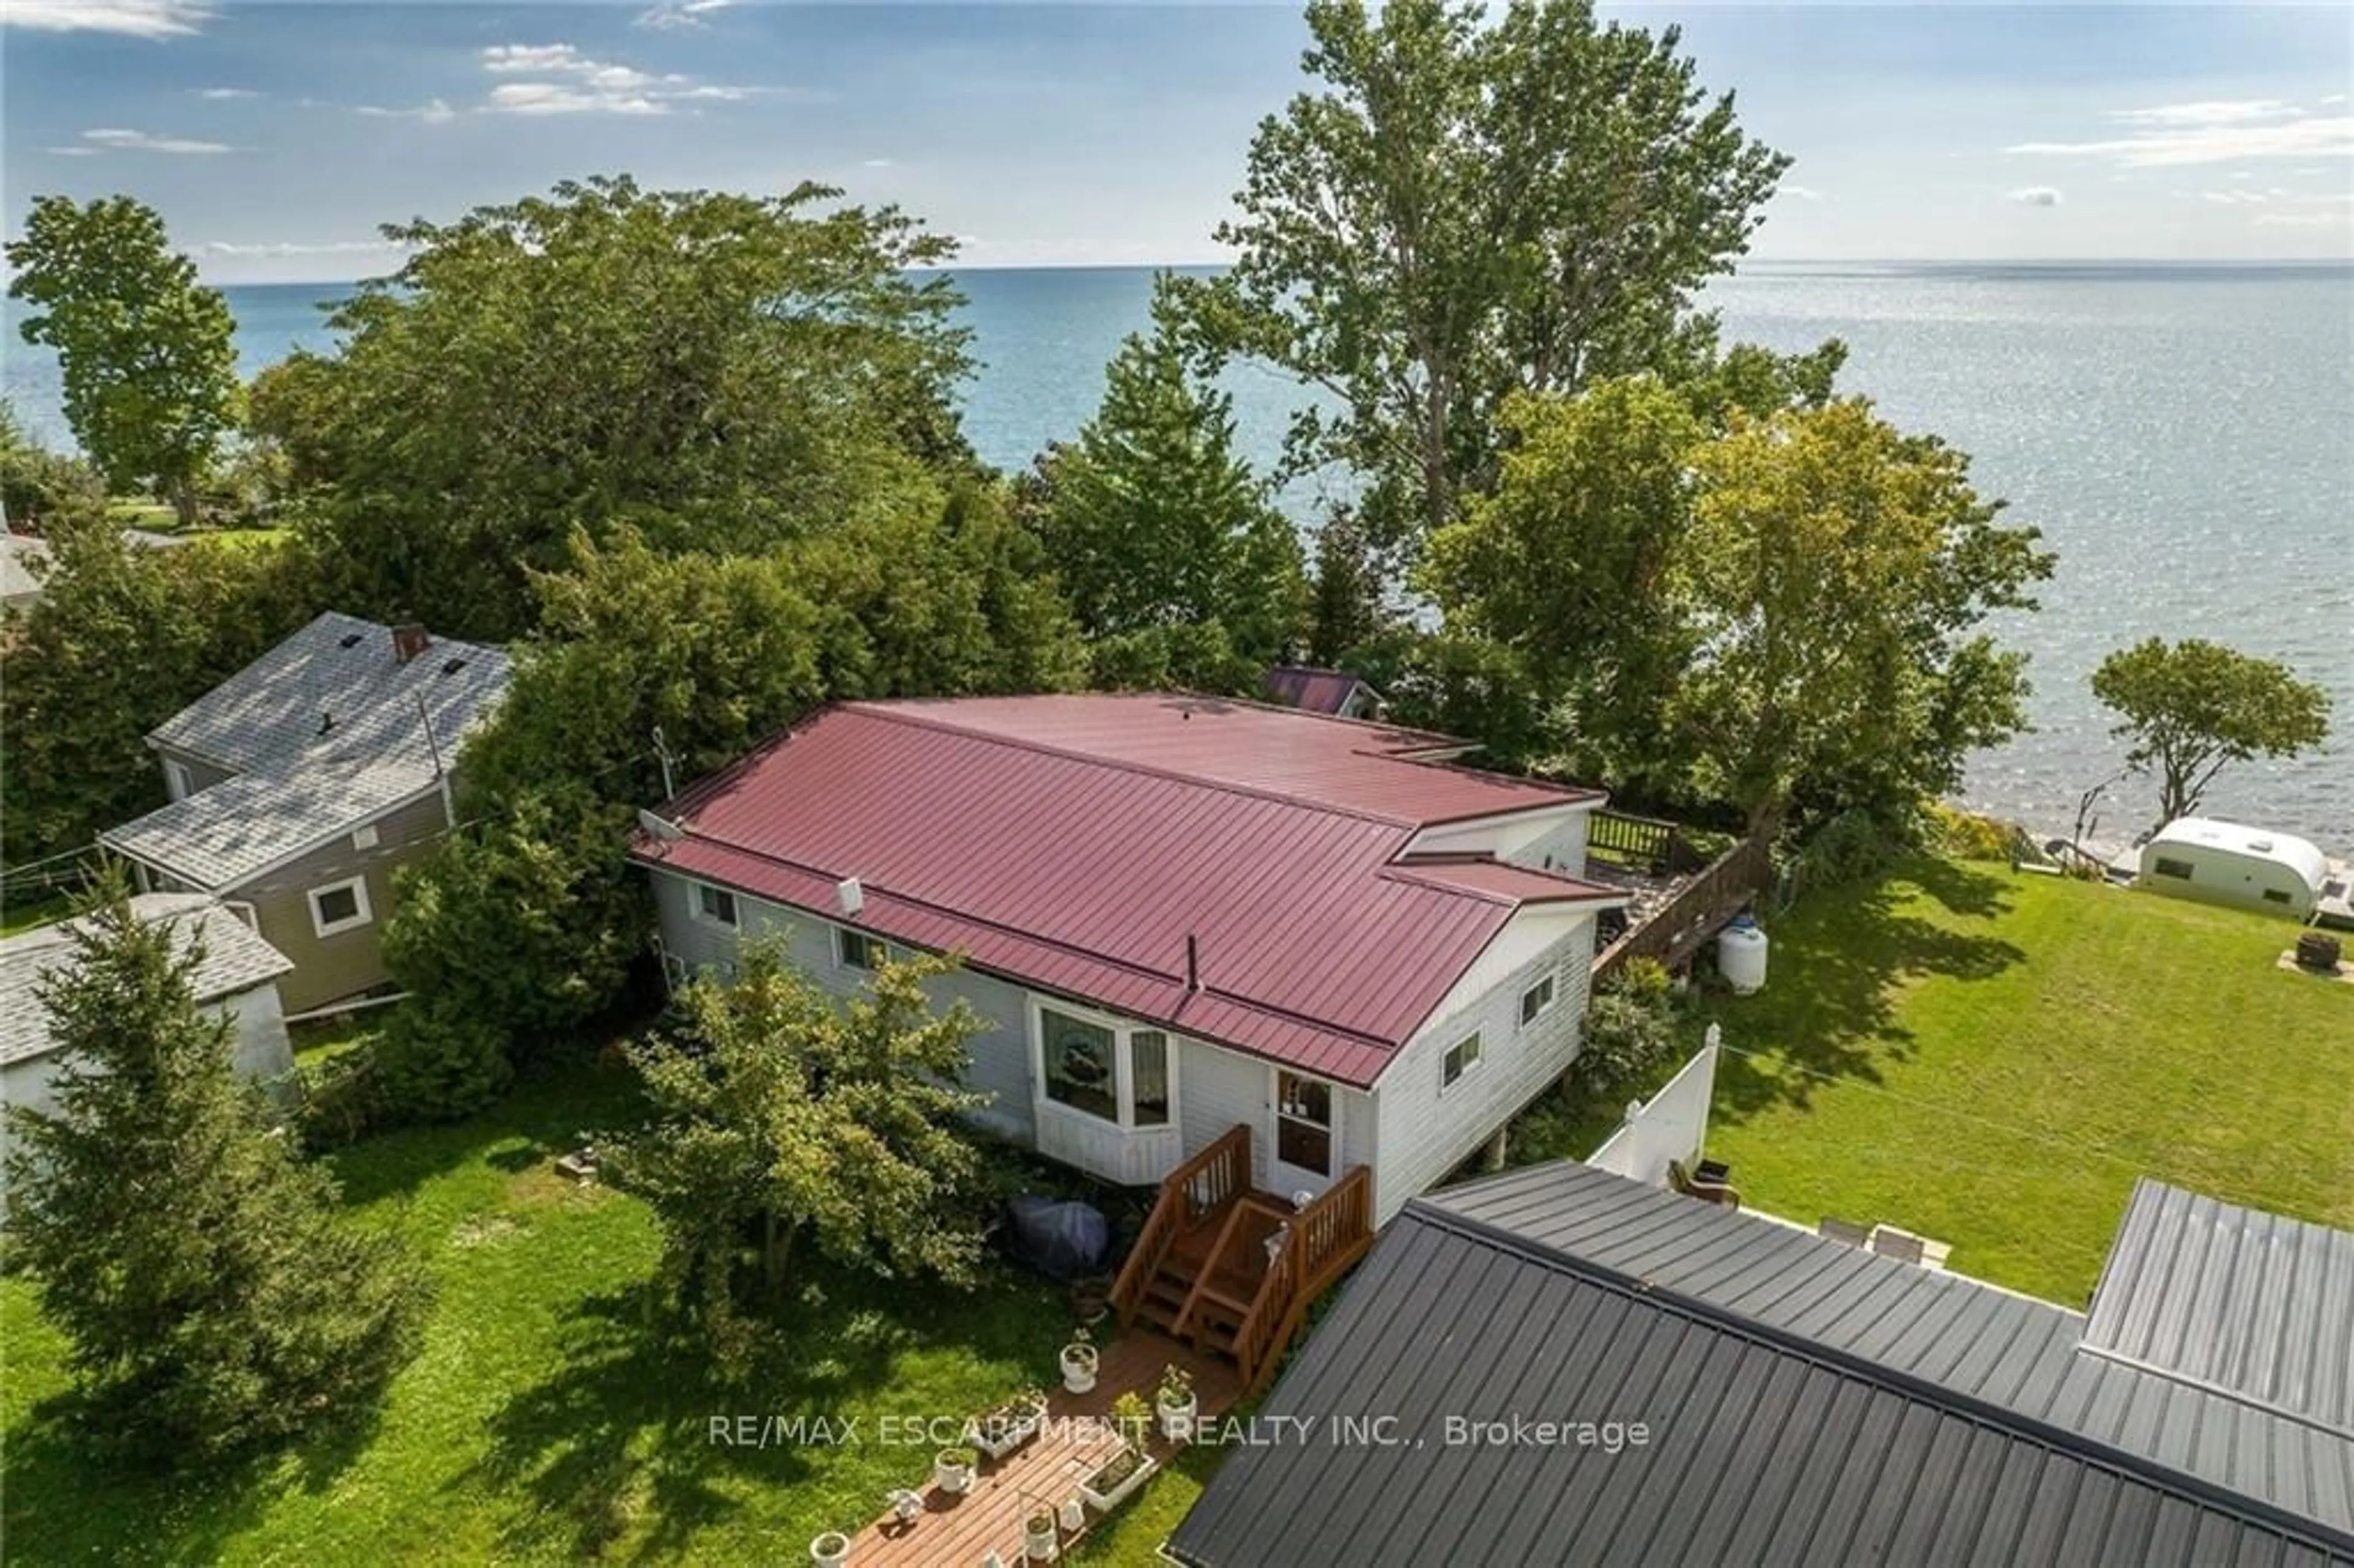 Lakeview for 406 South Coast Dr, Haldimand Ontario N0A 1L0